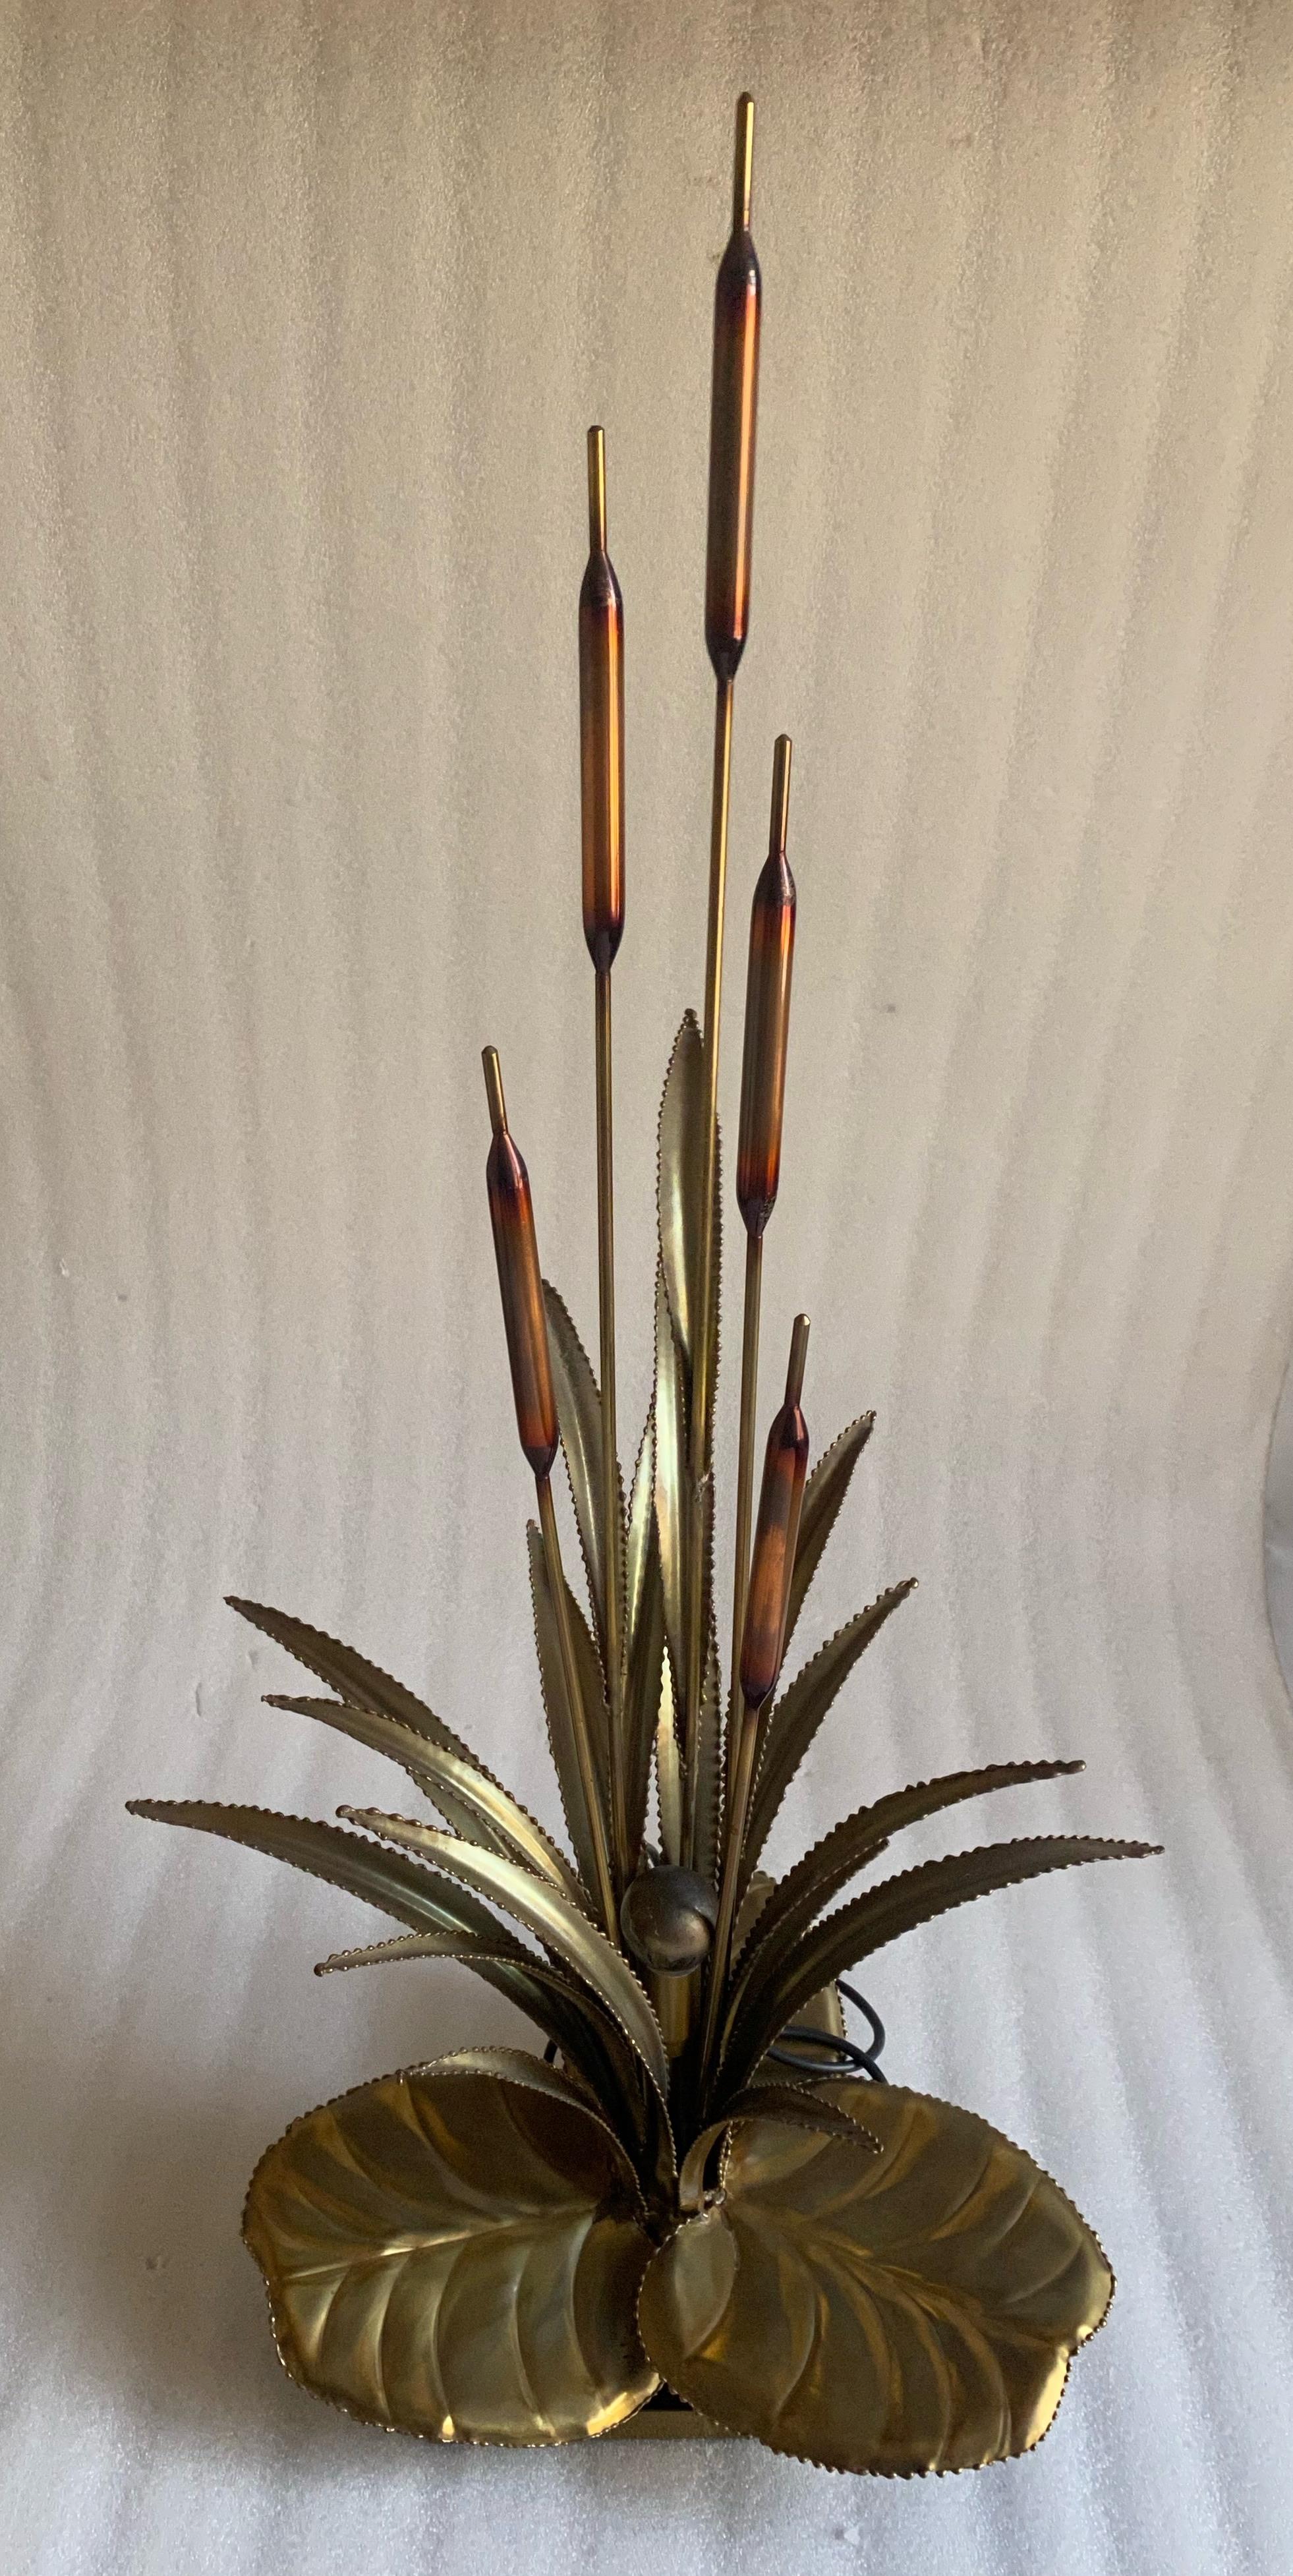 Lamp with 3 brass bulbs, reed decoration, Maison Jansen style, circa 1970, good condition,
Measures: Length: 40cm
Width: 40cm
Height: 96cm.